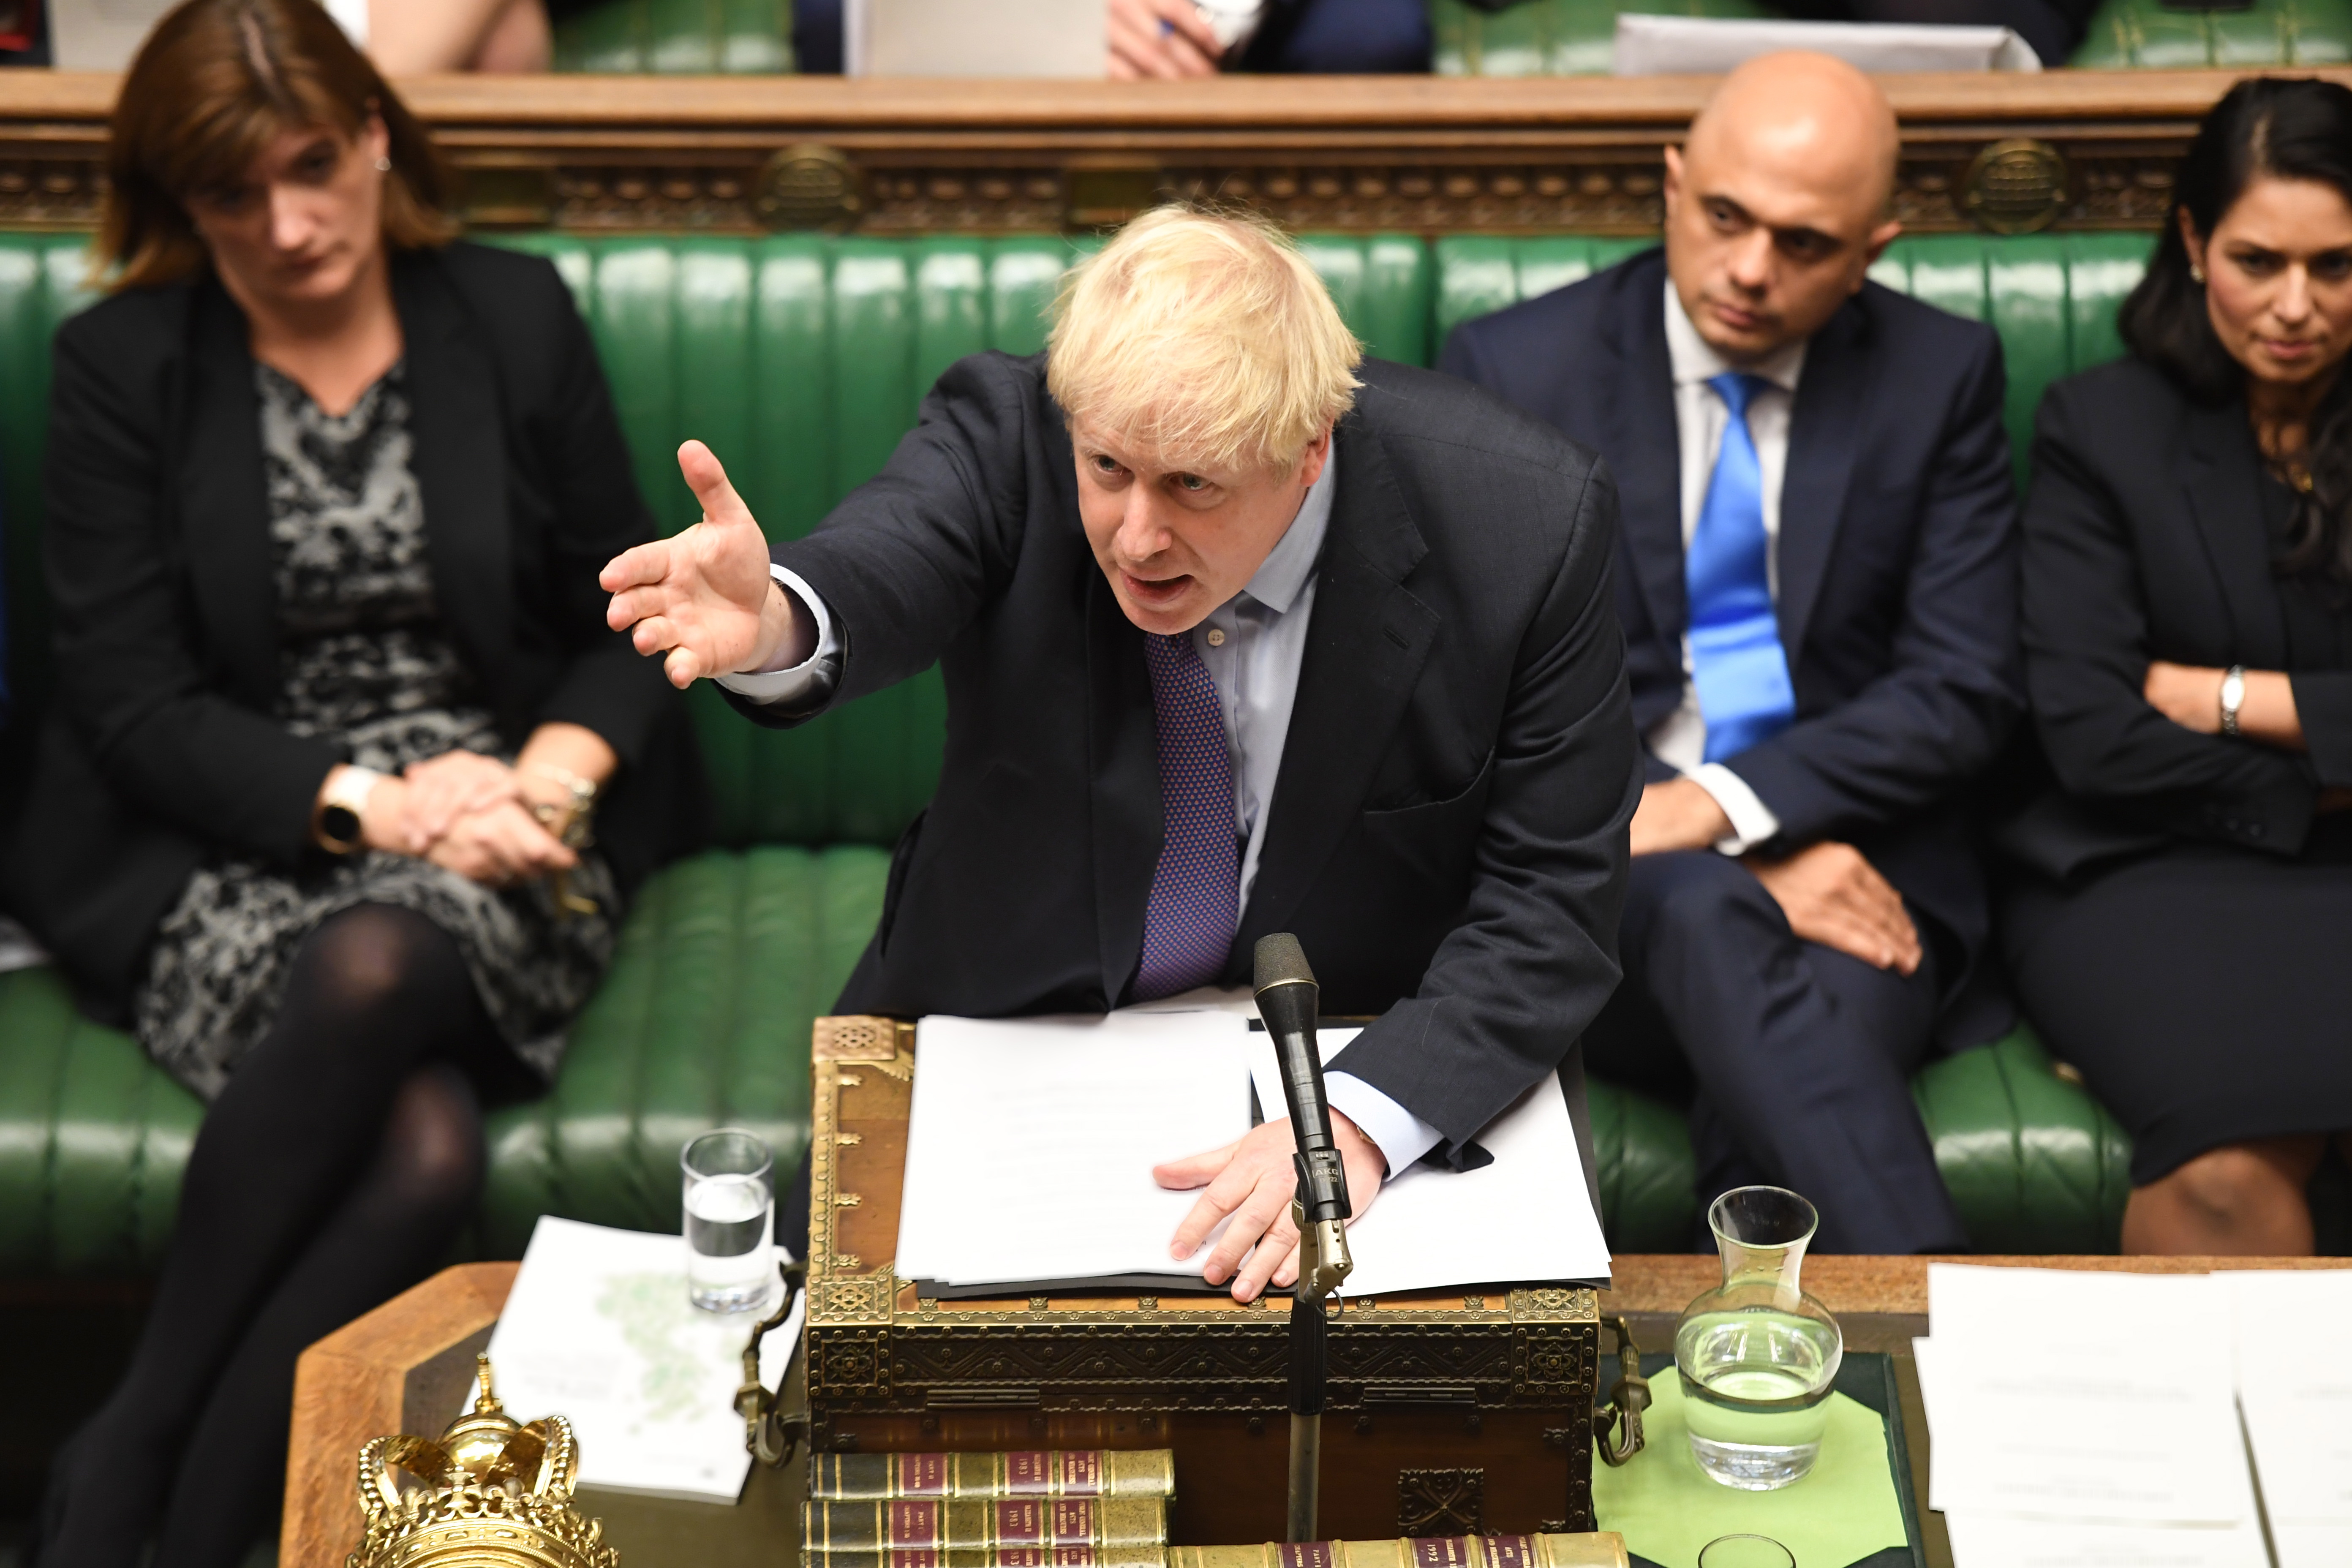 epa07940914 A handout picture made available by the UK Parliament shows British Prime Minister Boris Johnson speaking in the House of Commons in London, Britain, 22 October 2019. Johnson is urging MPs to back his Brexit deal in a final bid to get the UK to leave the EU by the end of the month.  EPA/JESSICA TAYLOR / UK PARLIAMENT / HANDOUT MANDATORY CREDIT: UK PARLIAMENT / JESSICA TAYLOR - Images must not be altered in any way. HANDOUT EDITORIAL USE ONLY/NO SALES